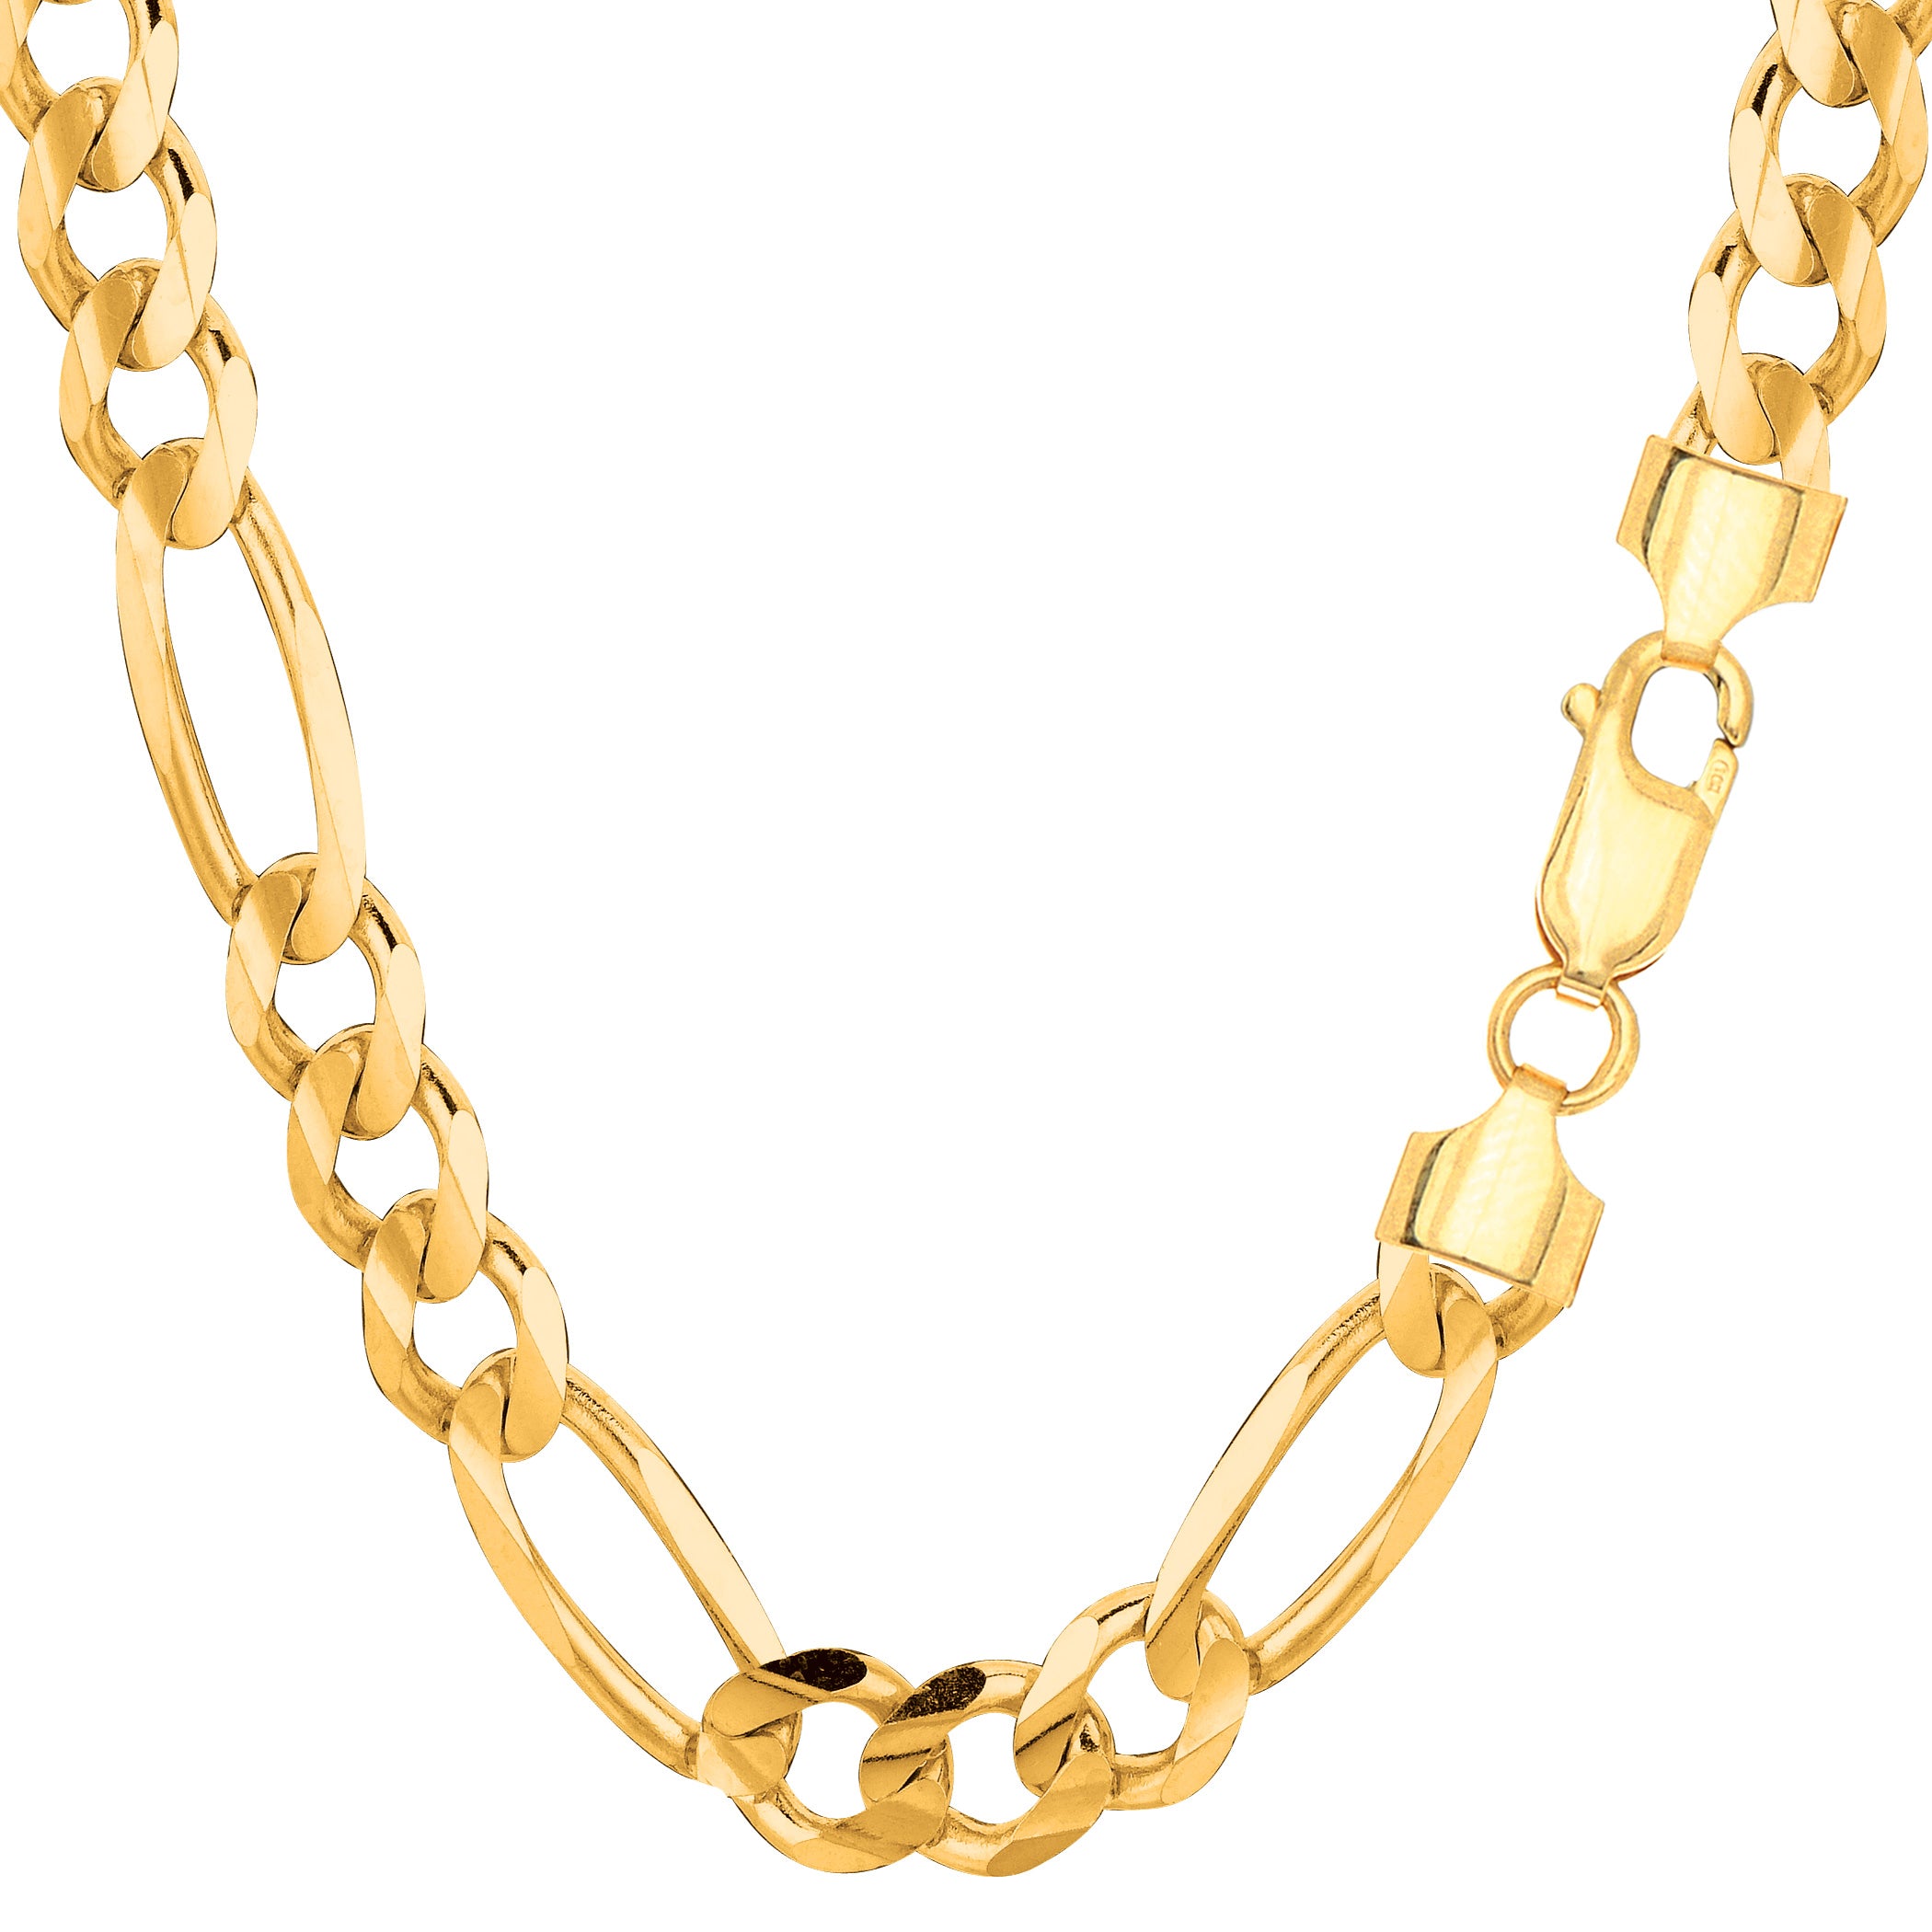 14k Yellow Solid Gold Figaro Chain Bracelet, 7.0mm fine designer jewelry for men and women